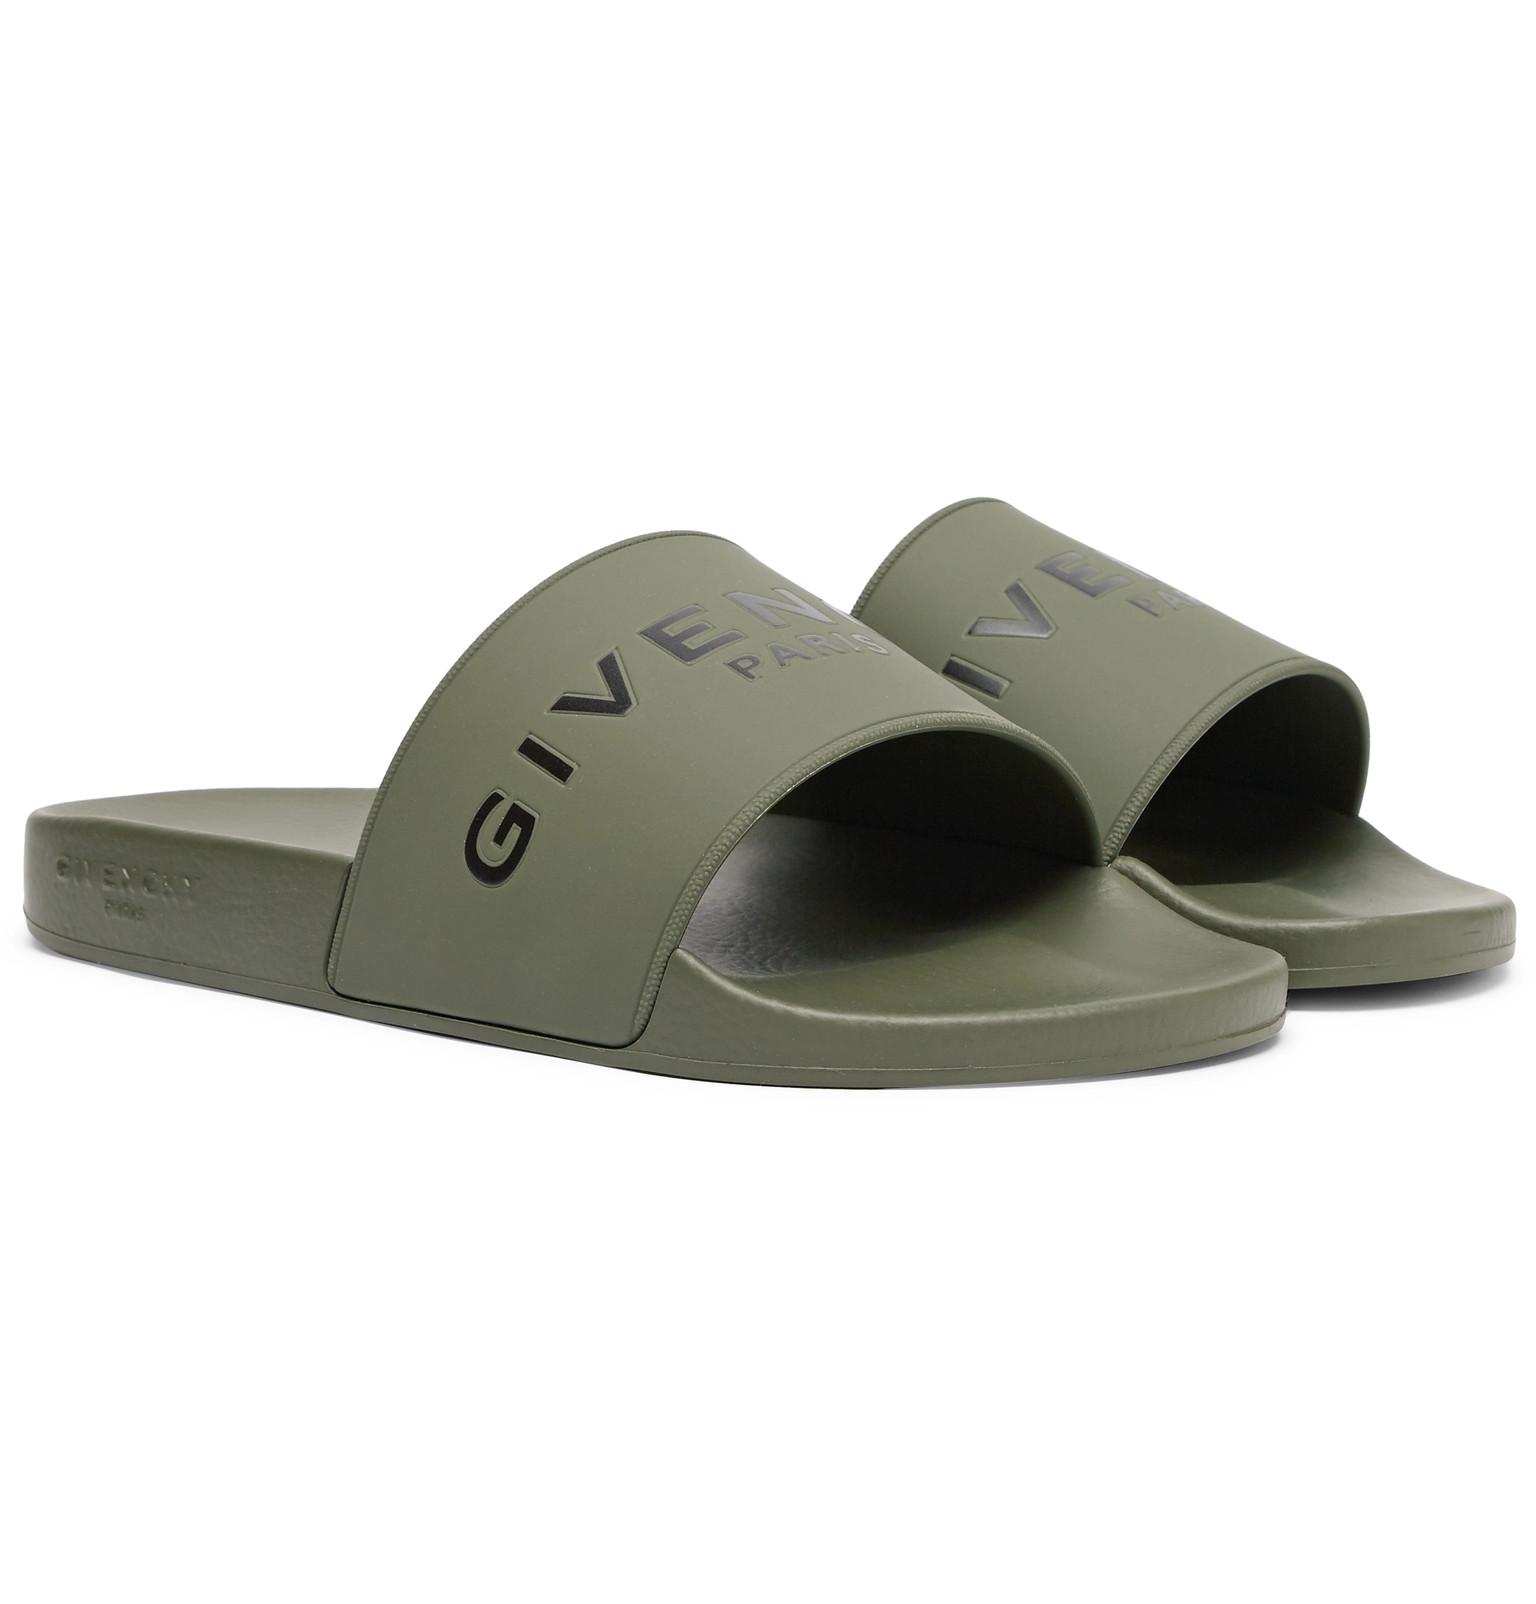 Givenchy Logo-print Rubber Slides in Army Green (Green) for Men - Lyst